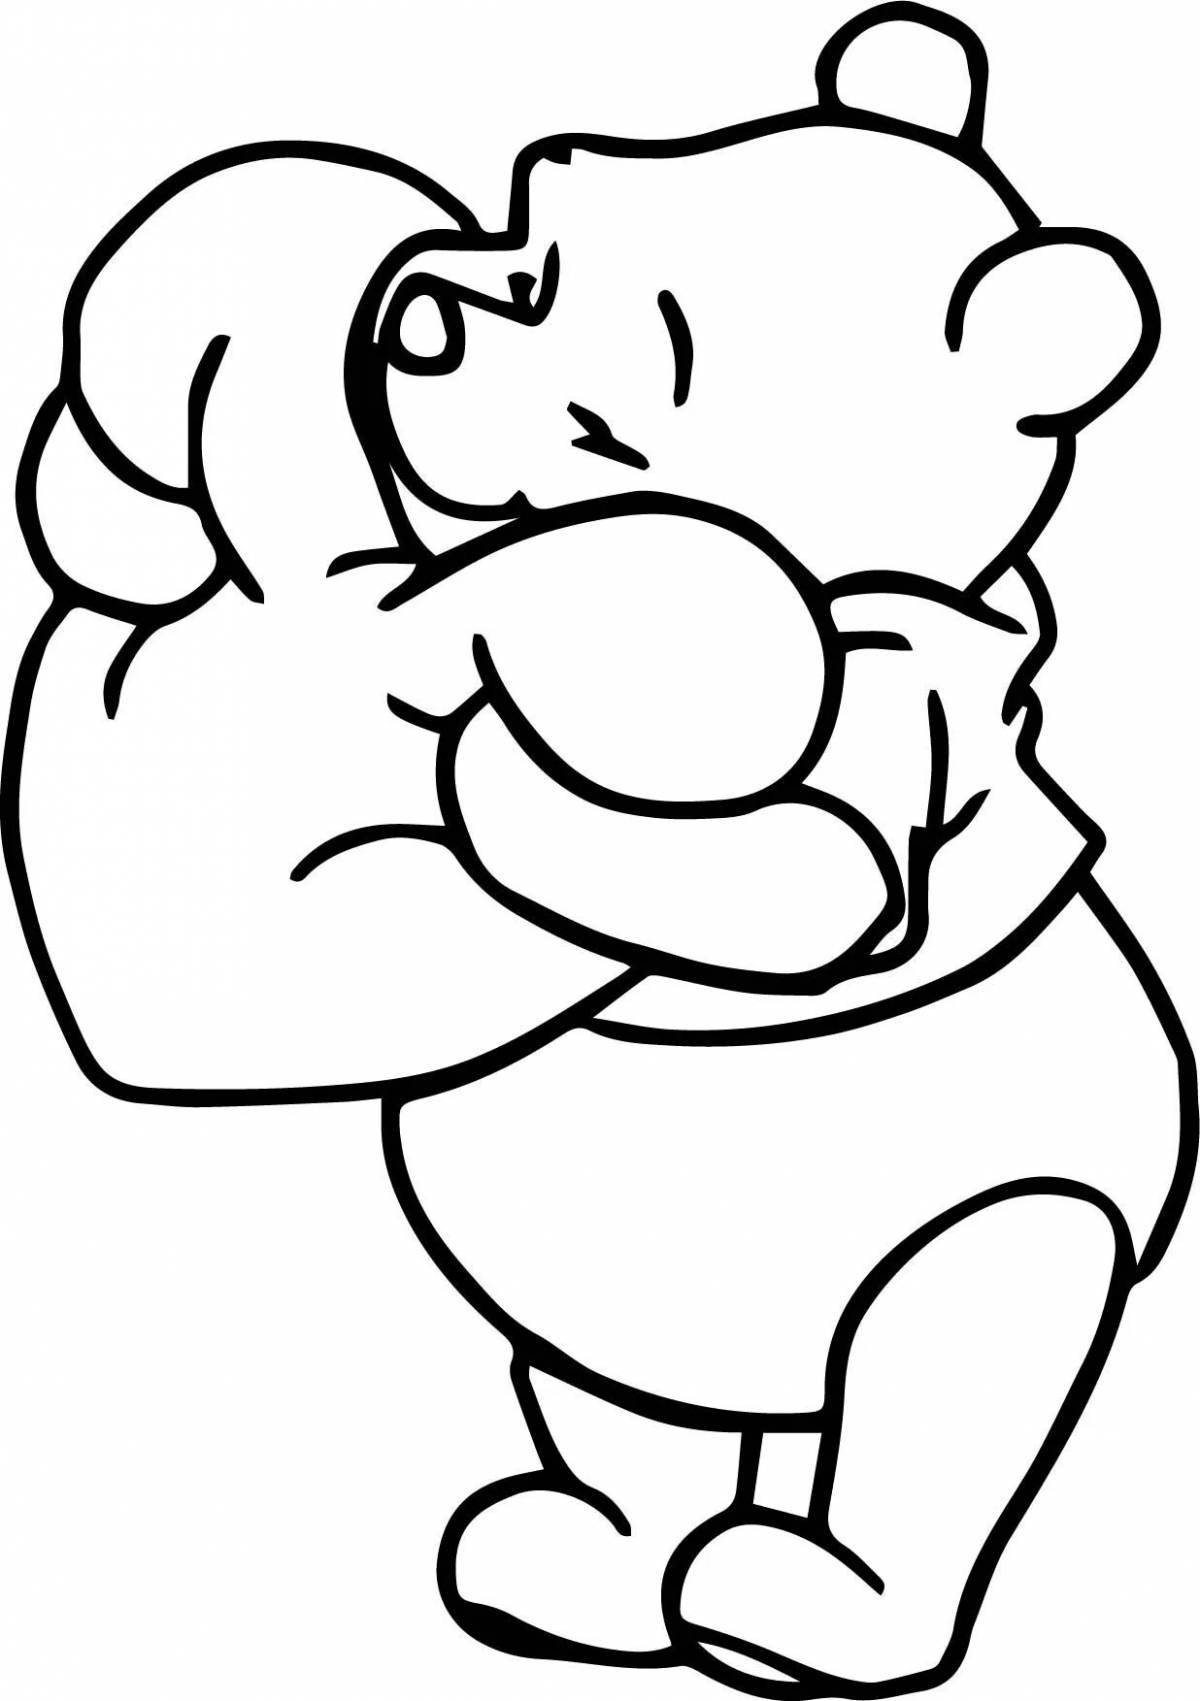 Coloring book plump teddy bear with a heart